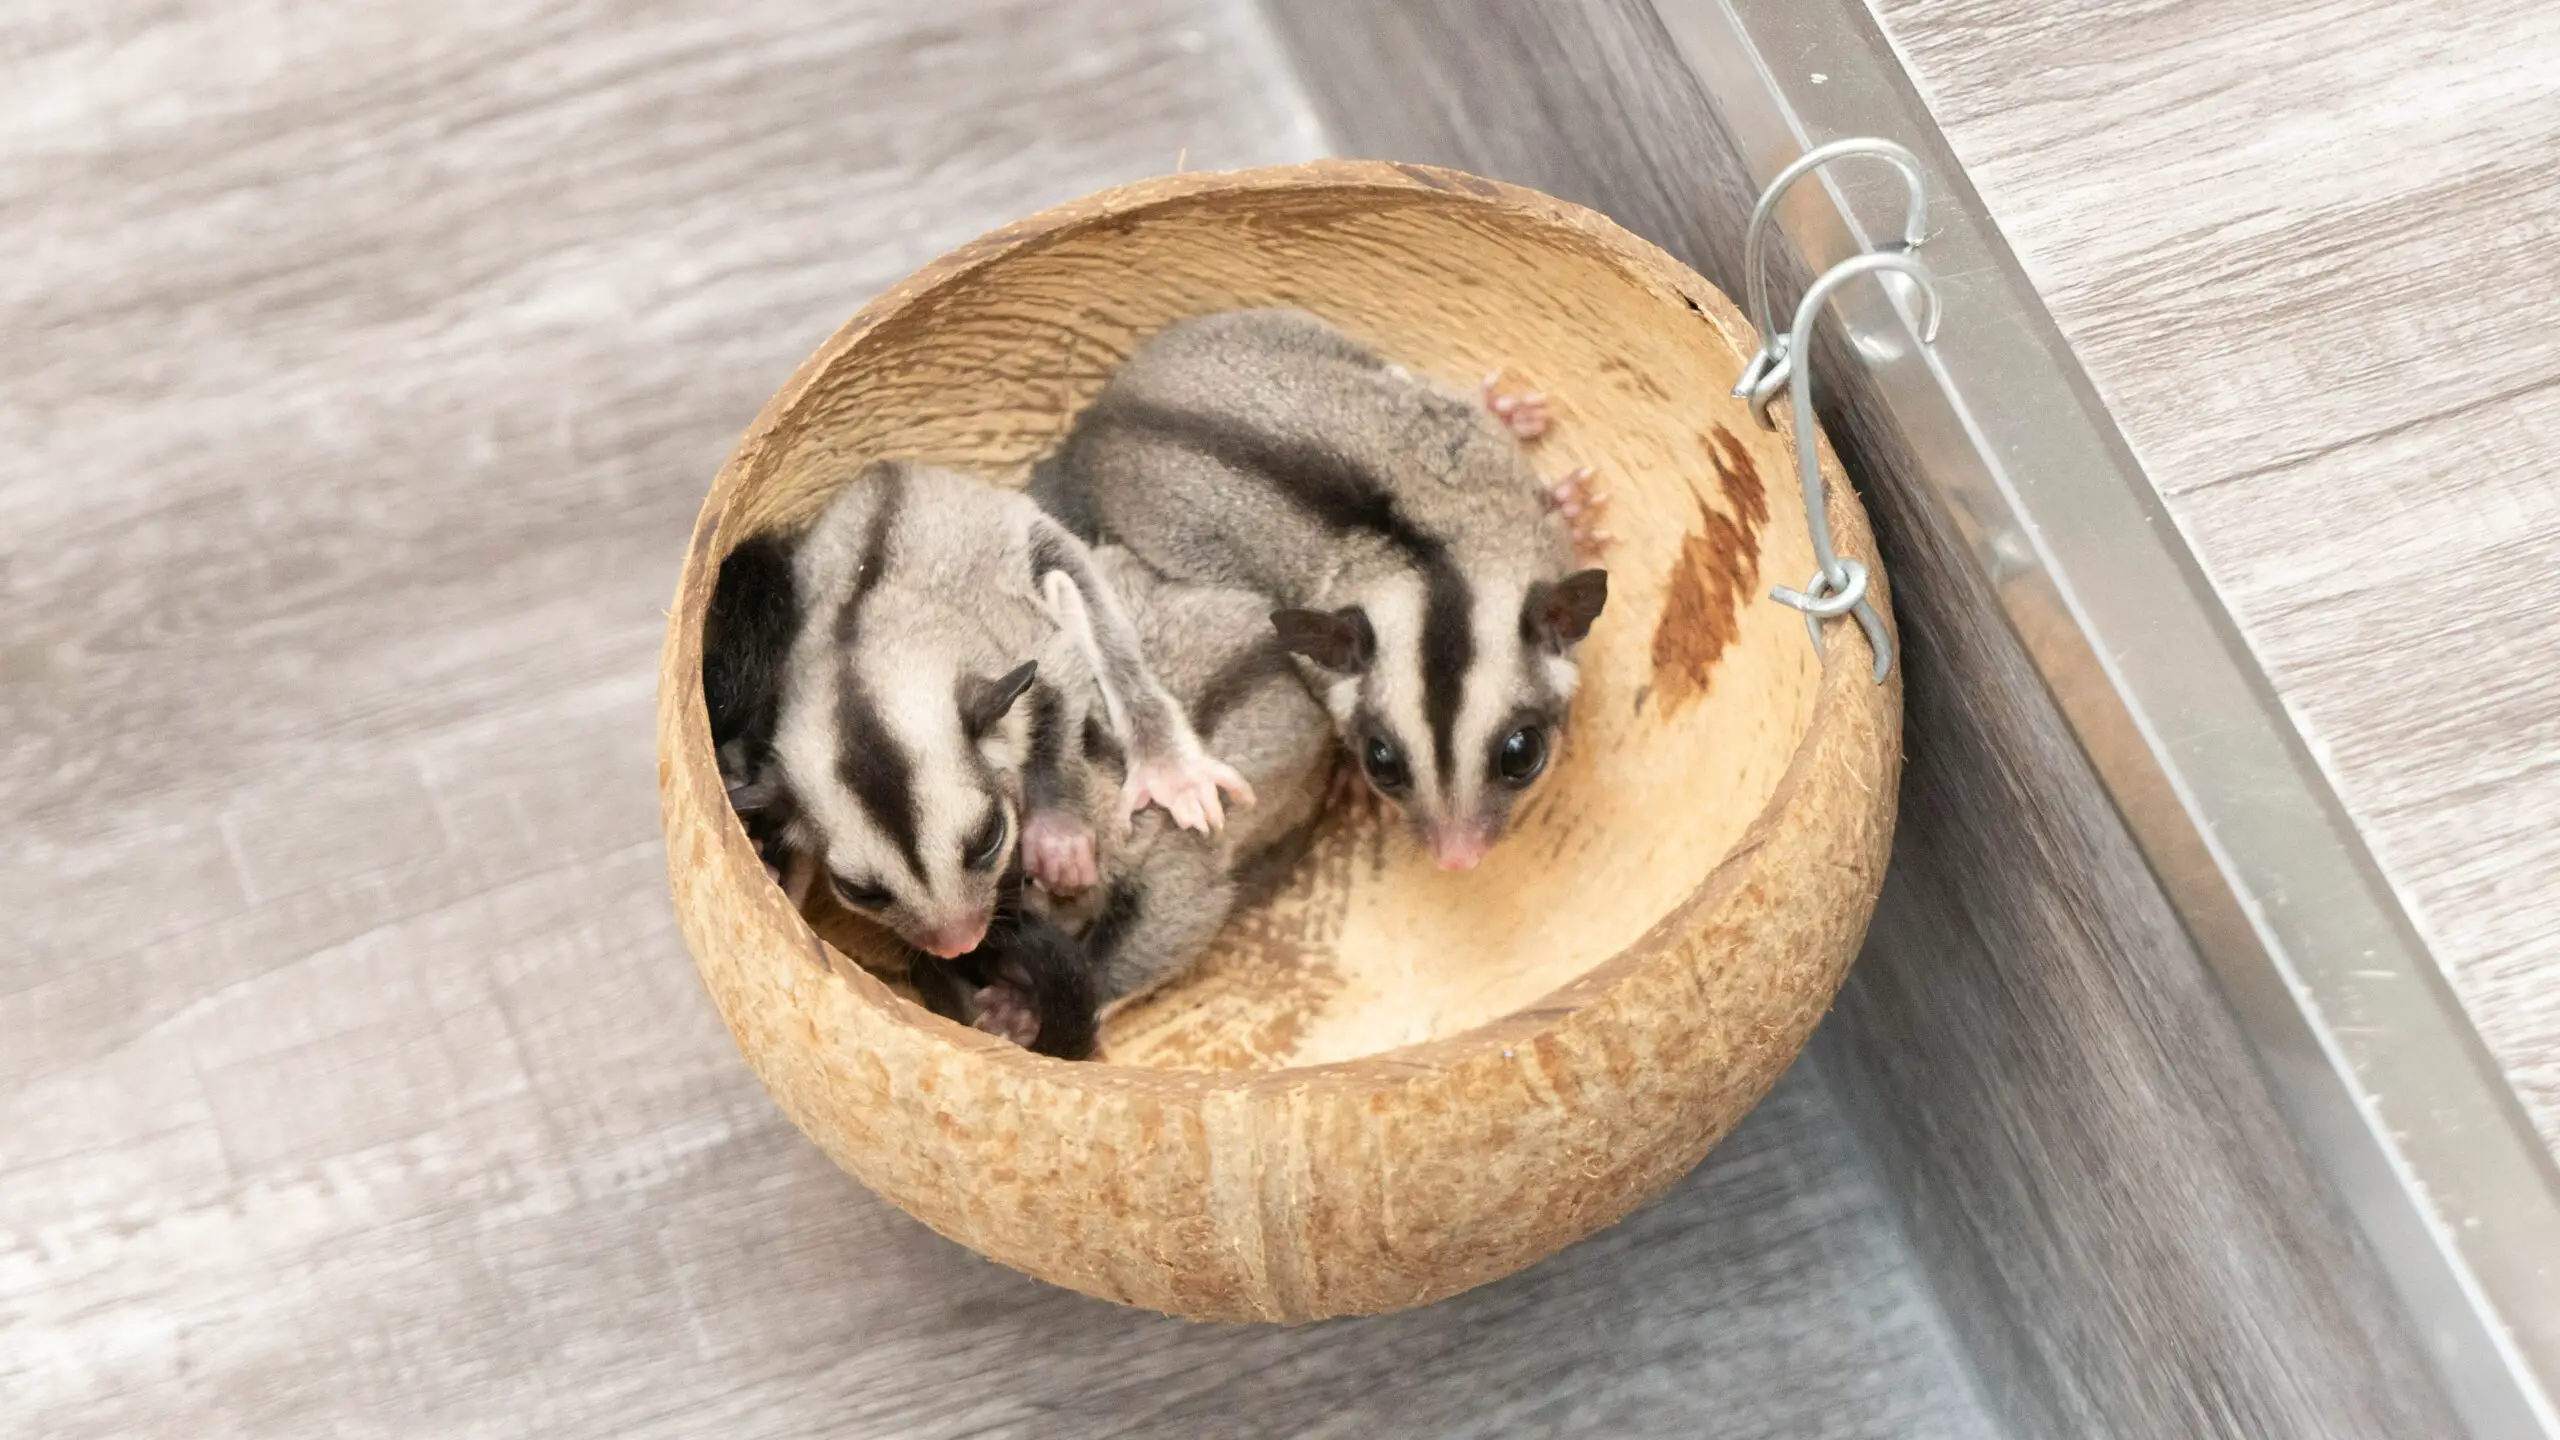 Are Sugar Gliders Good Emotional Support Animals?